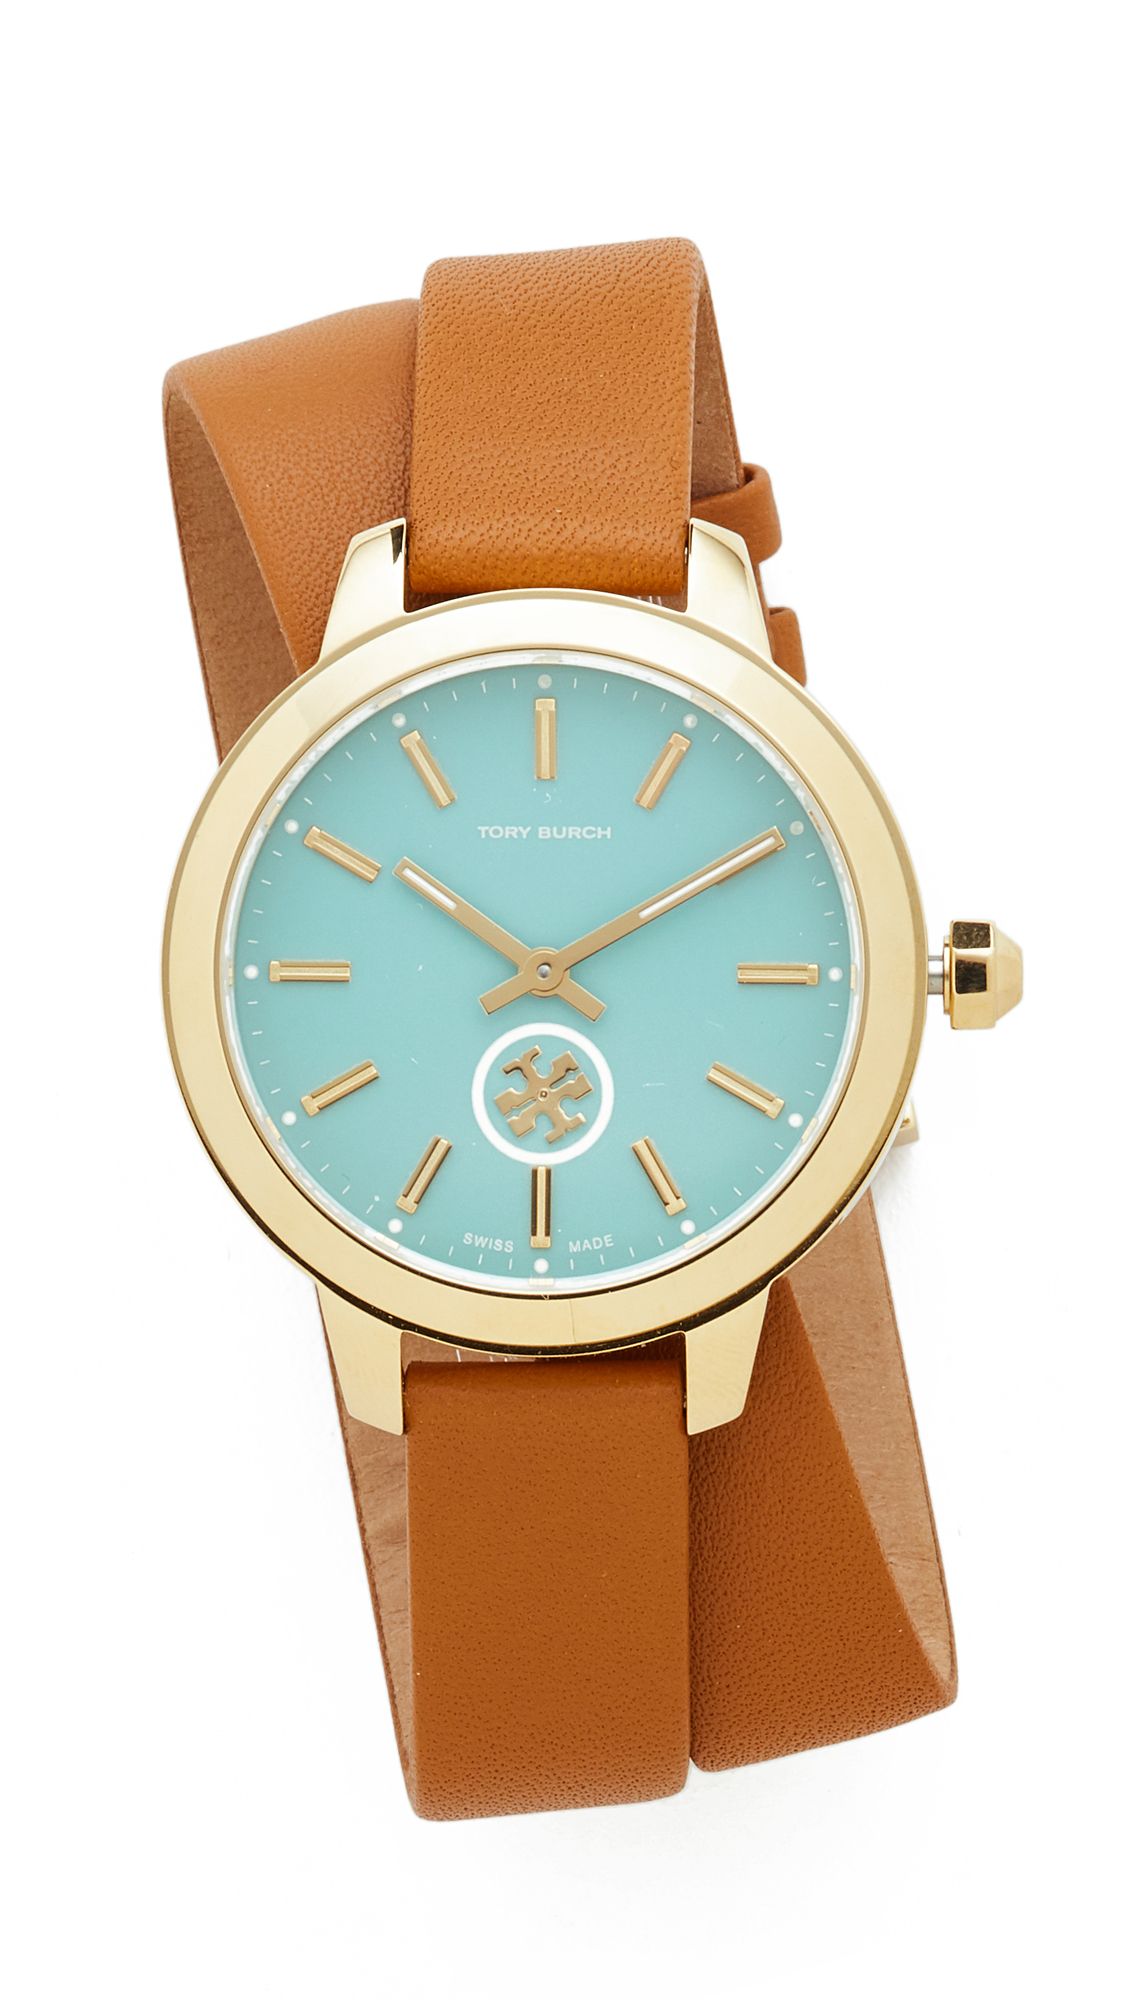 The Collins Leather Watch | Shopbop